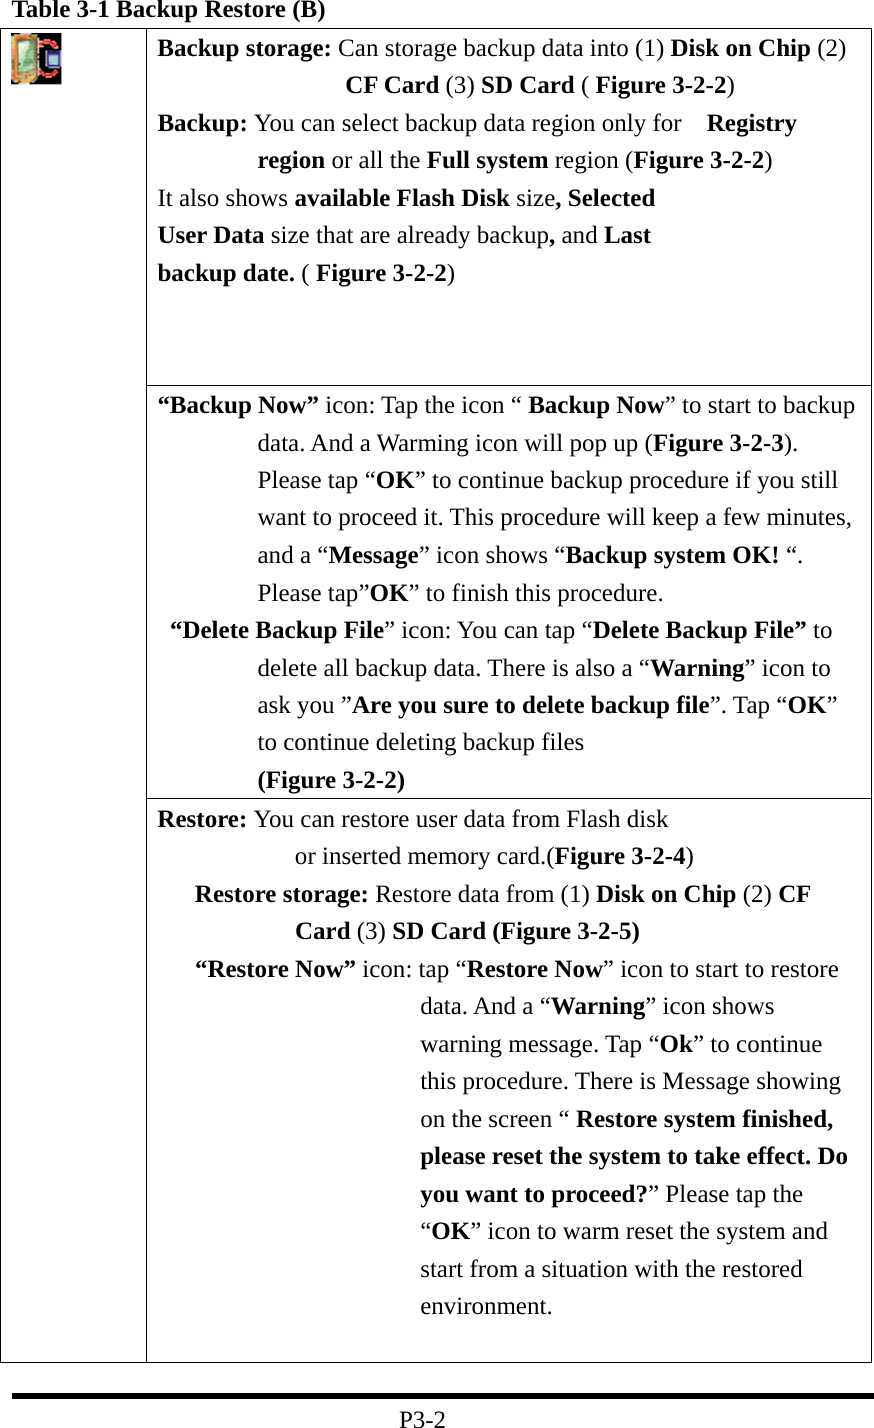 Table 3-1 Backup Restore (B) Backup storage: Can storage backup data into (1) Disk on Chip (2) CF Card (3) SD Card ( Figure 3-2-2) Backup: You can select backup data region only for    Registry region or all the Full system region (Figure 3-2-2) It also shows available Flash Disk size, Selected User Data size that are already backup, and Last backup date. ( Figure 3-2-2)  “Backup Now” icon: Tap the icon “ Backup Now” to start to backup data. And a Warming icon will pop up (Figure 3-2-3). Please tap “OK” to continue backup procedure if you still want to proceed it. This procedure will keep a few minutes, and a “Message” icon shows “Backup system OK! “. Please tap”OK” to finish this procedure.   “Delete Backup File” icon: You can tap “Delete Backup File” to delete all backup data. There is also a “Warning” icon to ask you ”Are you sure to delete backup file”. Tap “OK” to continue deleting backup files         (Figure 3-2-2)  Restore: You can restore user data from Flash disk         or inserted memory card.(Figure 3-2-4)    Restore storage: Restore data from (1) Disk on Chip (2) CF Card (3) SD Card (Figure 3-2-5)    “Restore Now” icon: tap “Restore Now” icon to start to restore data. And a “Warning” icon shows warning message. Tap “Ok” to continue this procedure. There is Message showing on the screen “ Restore system finished, please reset the system to take effect. Do you want to proceed?” Please tap the “OK” icon to warm reset the system and start from a situation with the restored environment.     P3-2 